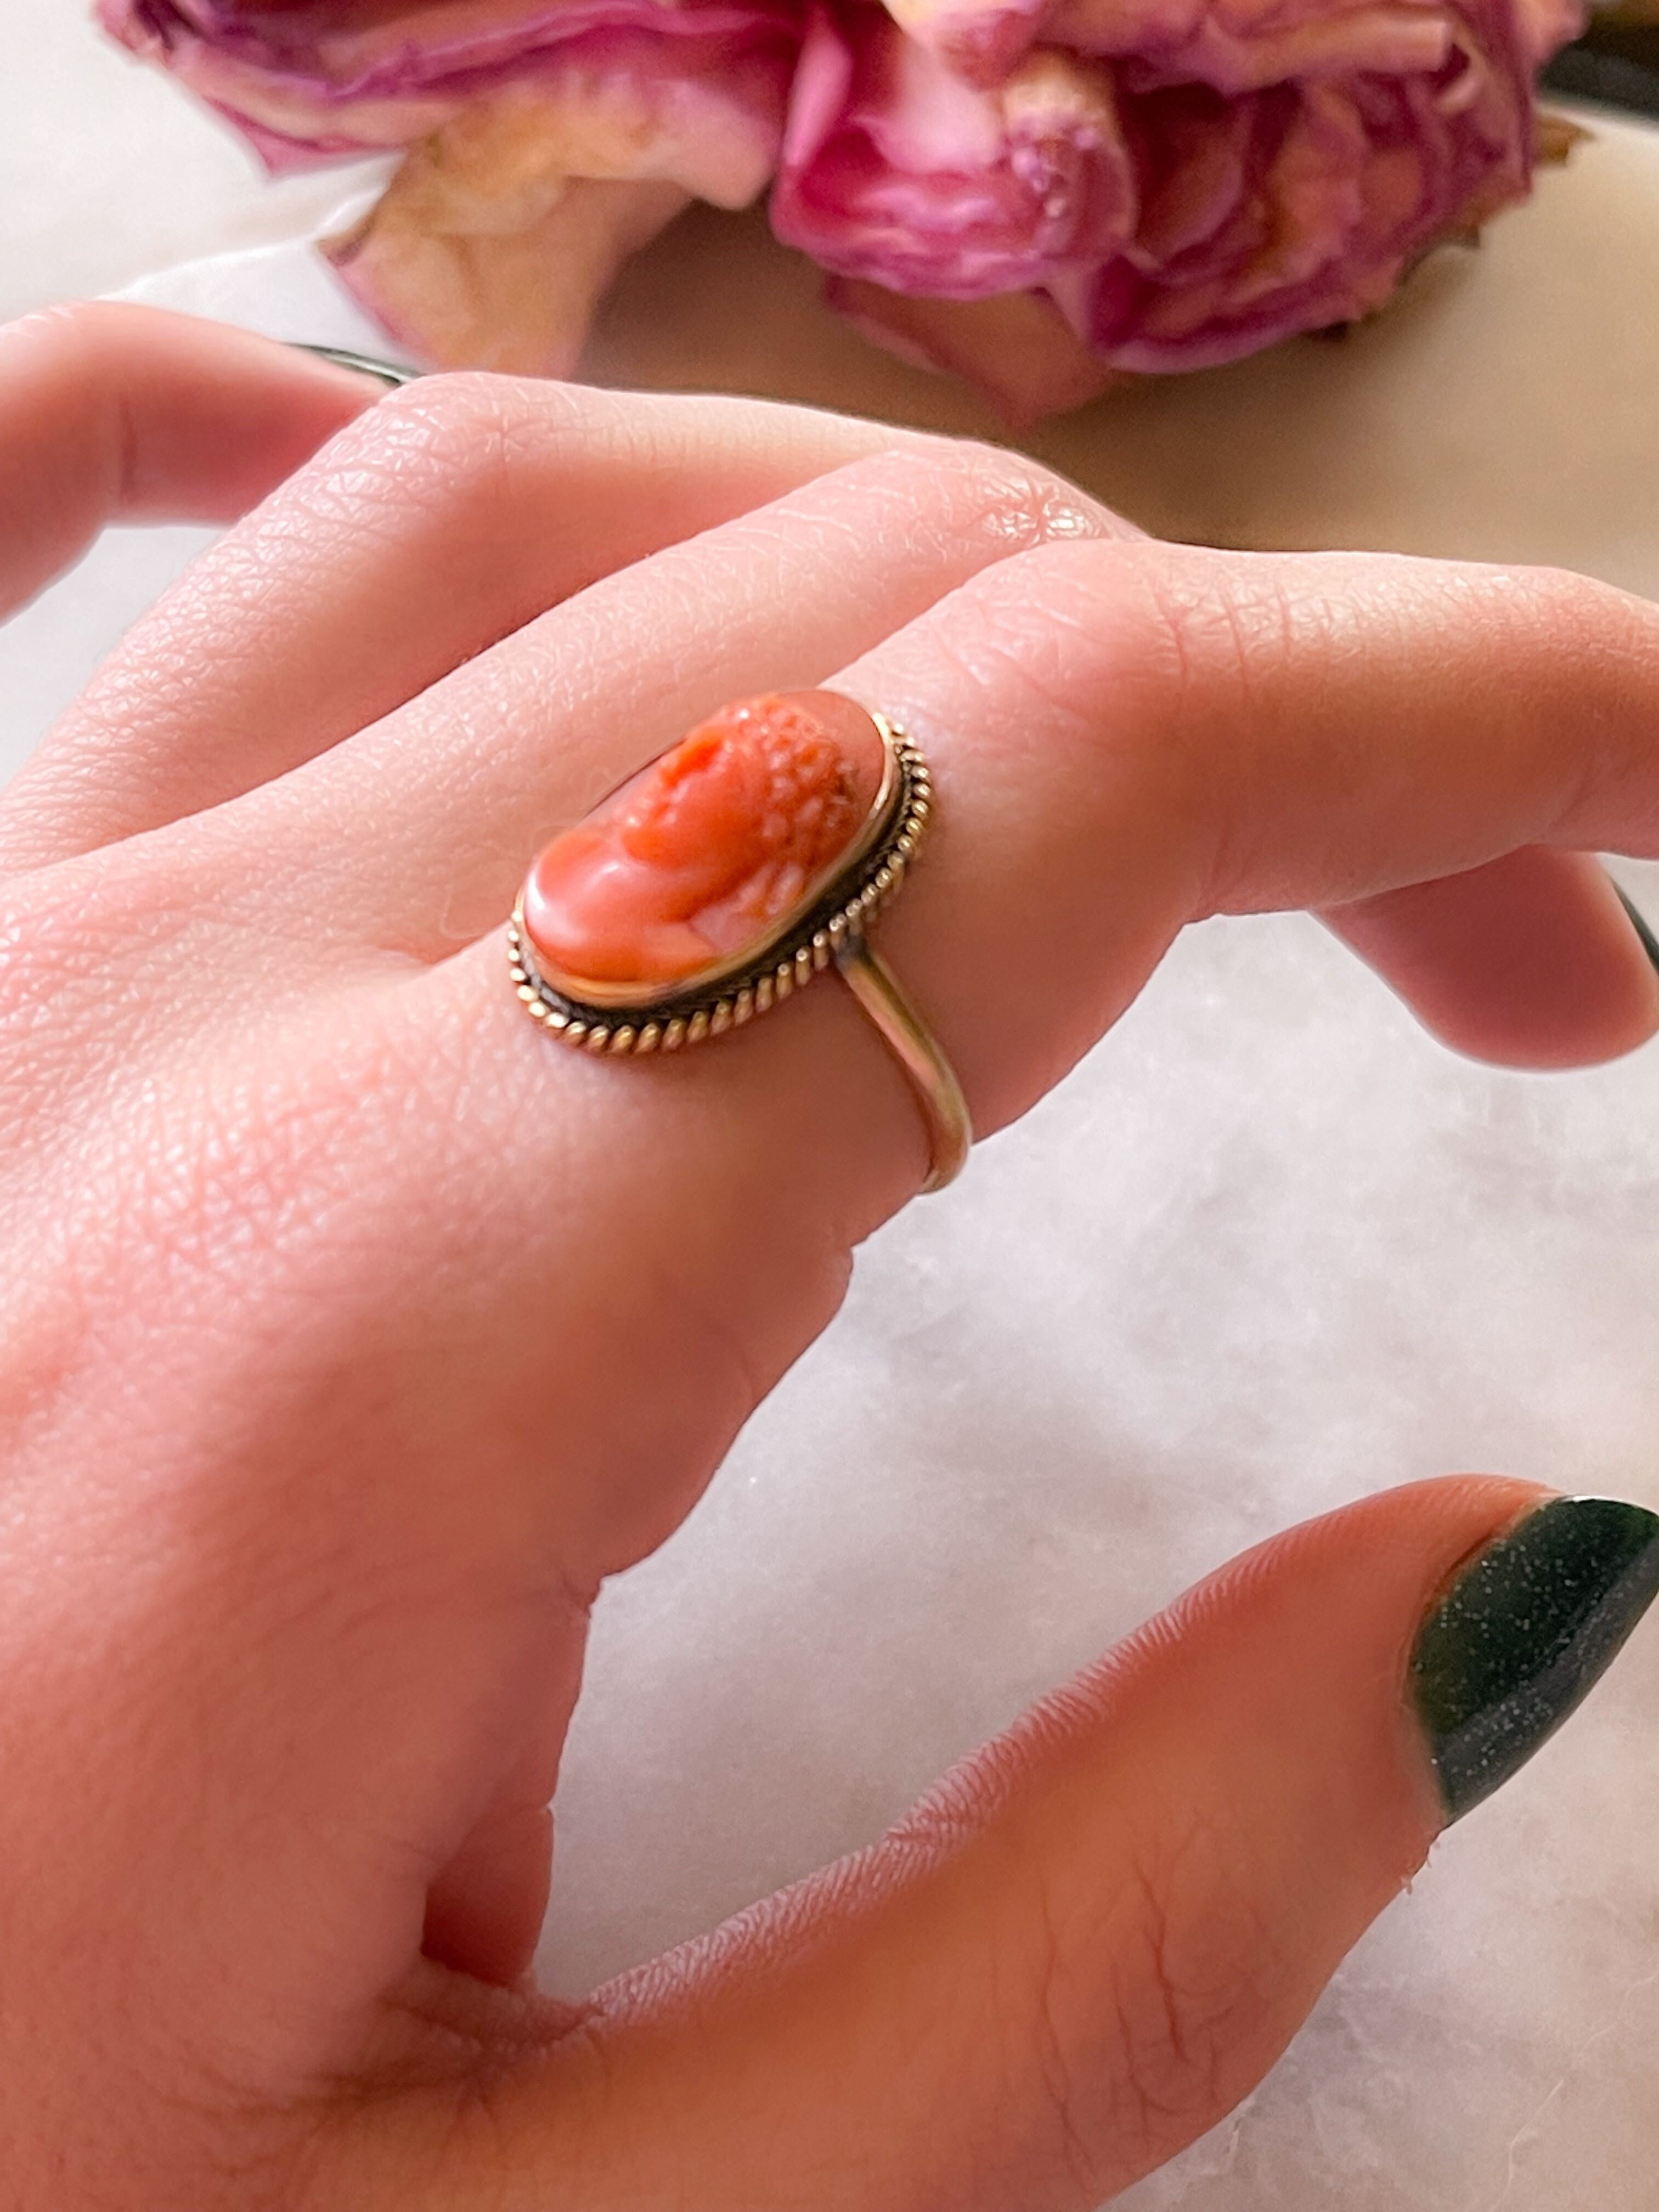 Coral Cameo Ring Set in 14k